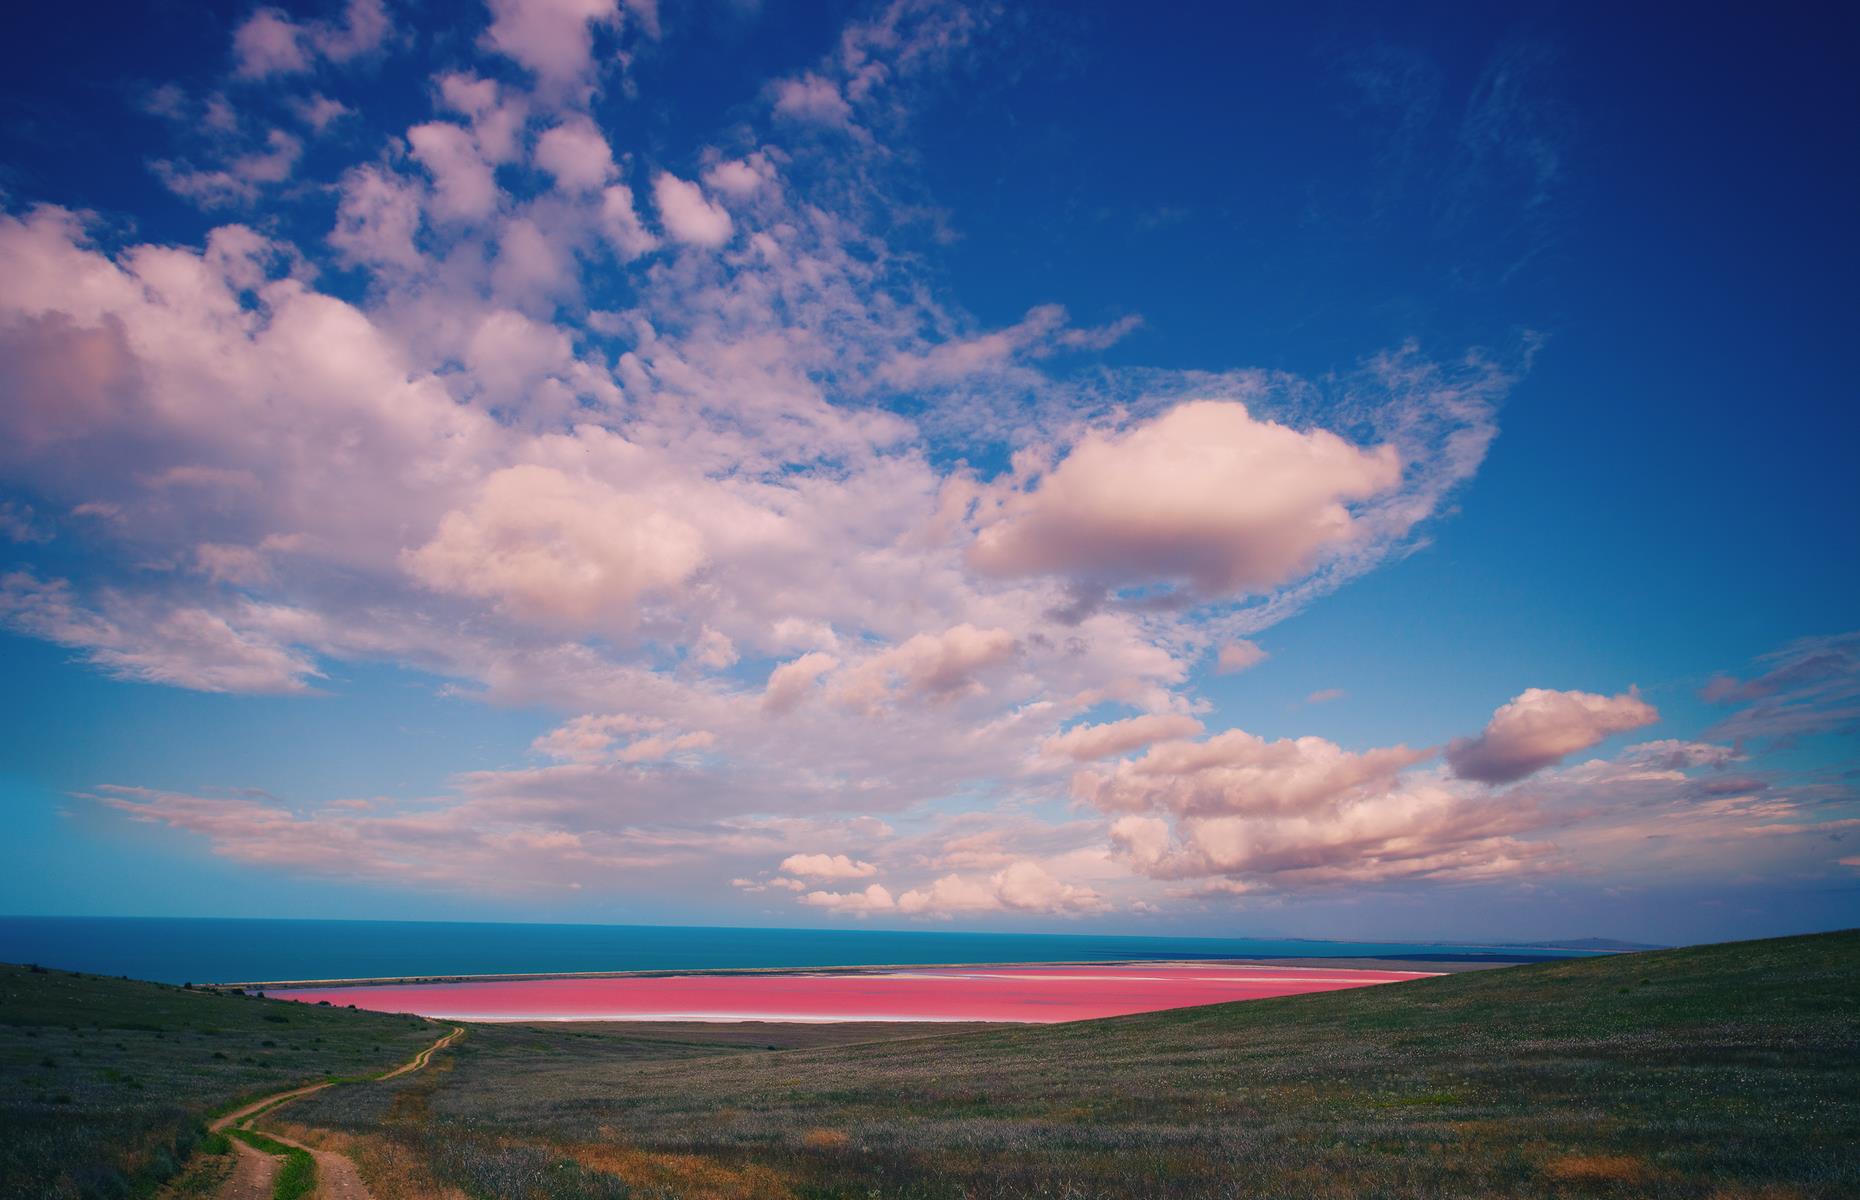 Australia’s natural wonders come in a kaleidoscope of colors, including bright pink. The pretty-hued Lake Hillier can be found on Middle Island in Western Australia’s Recherche Archipelago, around 130km (70 miles) from Esperance. Framed by green forest and blue water, it’s an extraordinary sight. Head up on a scenic flight to get the best views. It’s not certain exactly why the water is pink but it’s thought to be related to its high salt levels.